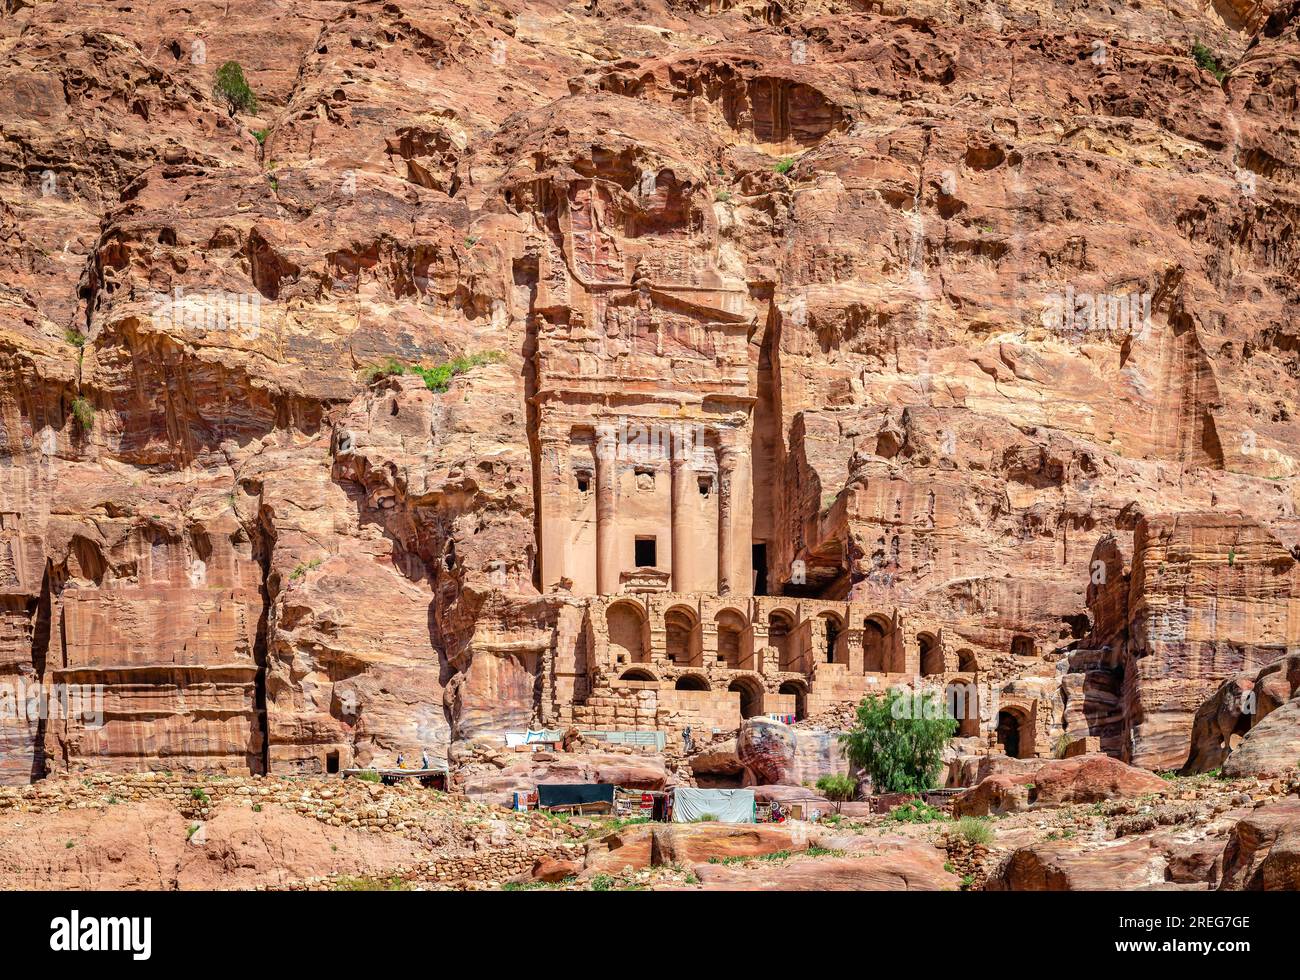 The Royal Tombs, a series of large carved mausoleums with impressive facades overlooking the ancient city Petra, in Jordan. Stock Photo